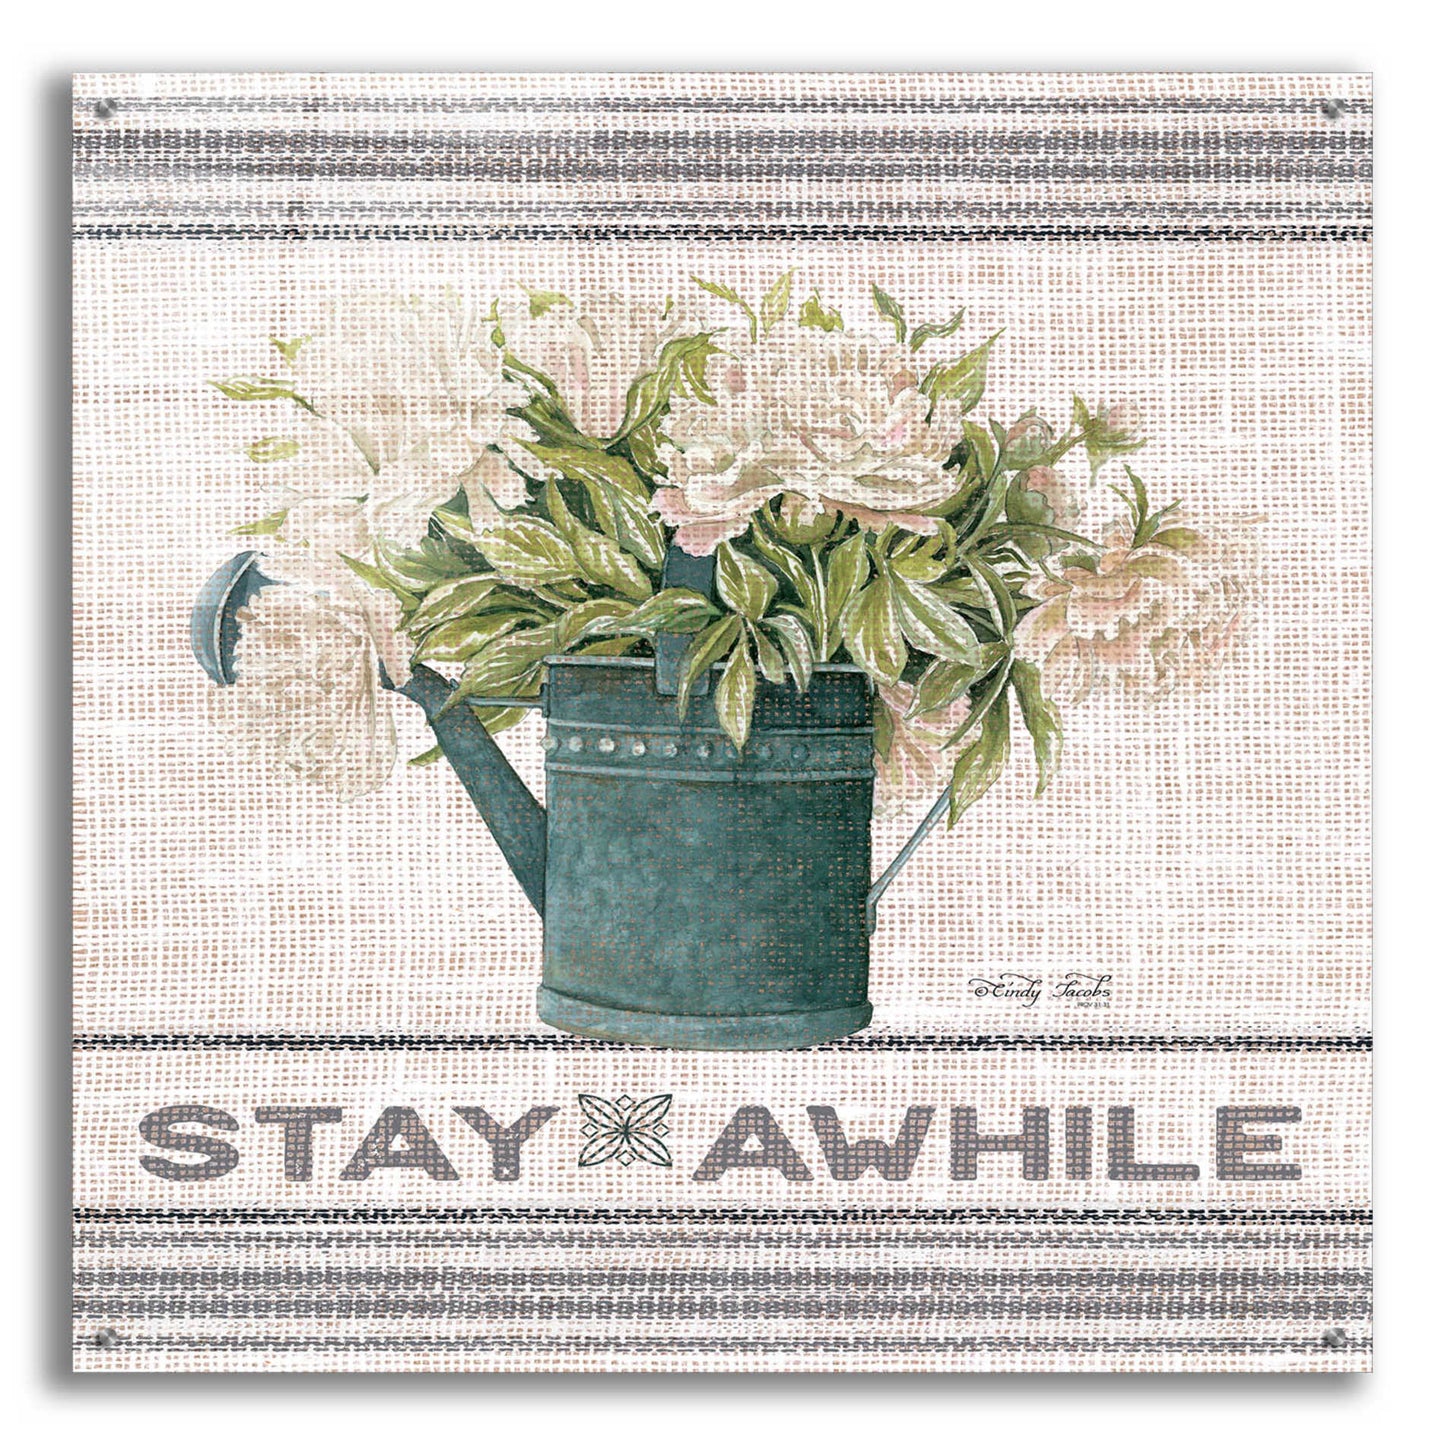 Epic Art 'Galvanized Peonies Stay Awhile' by Cindy Jacobs, Acrylic Glass Wall Art,36x36